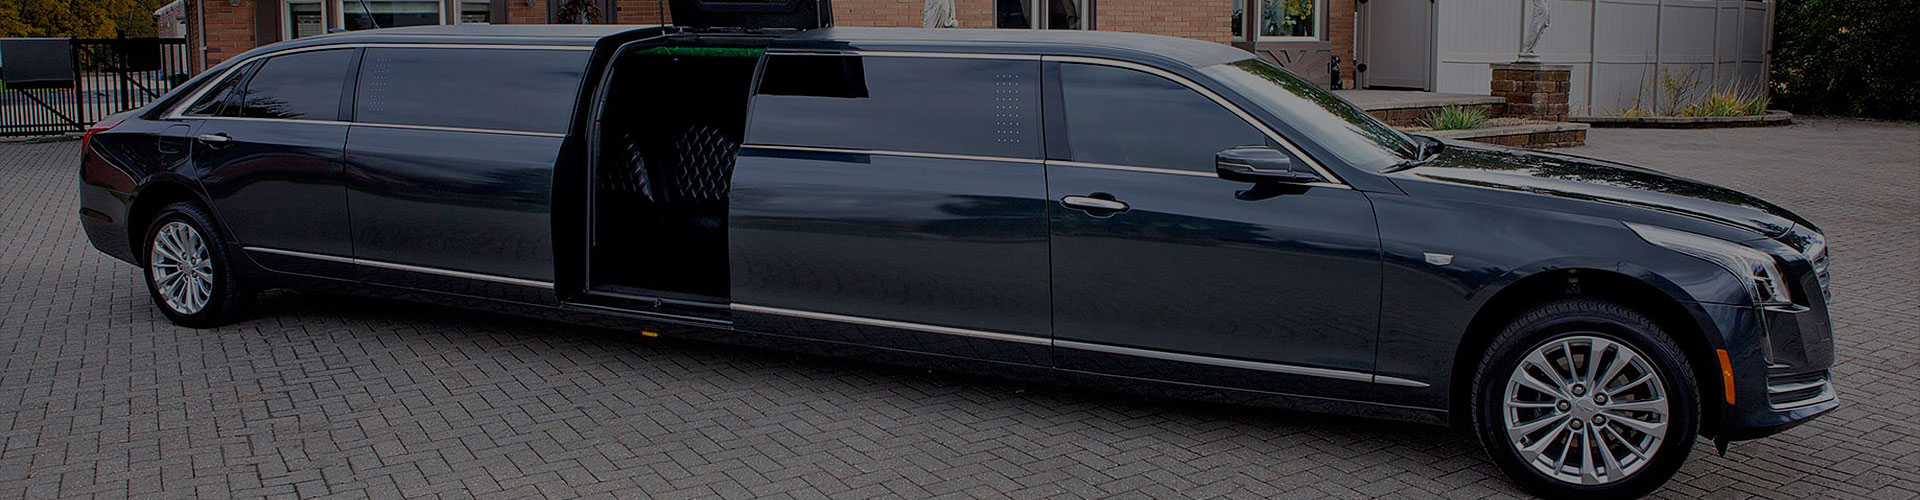 About USA Airport Limo